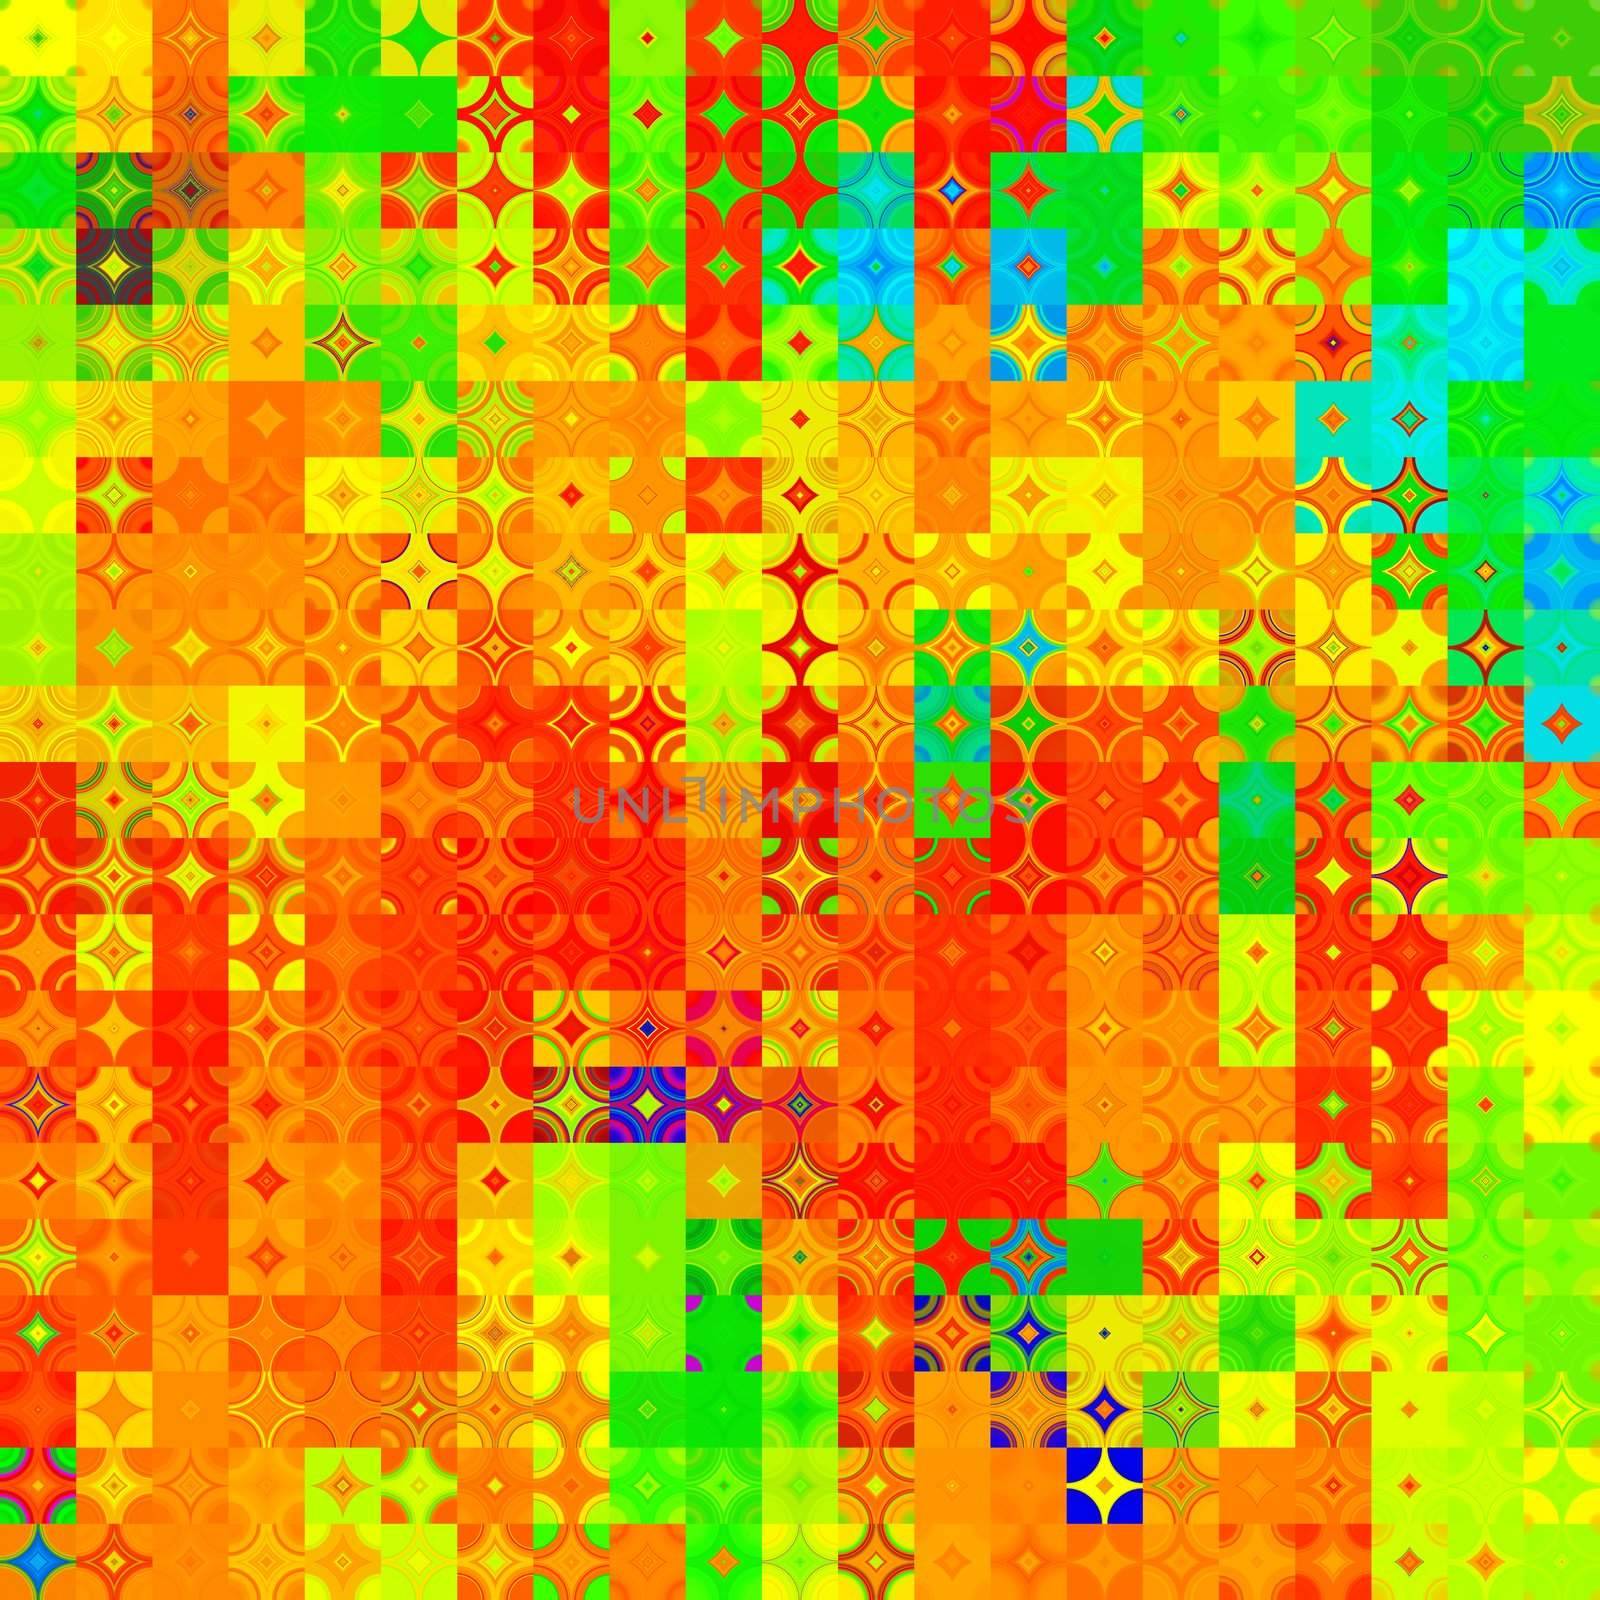 grunge texture of many vibrant squares, rounds and checks